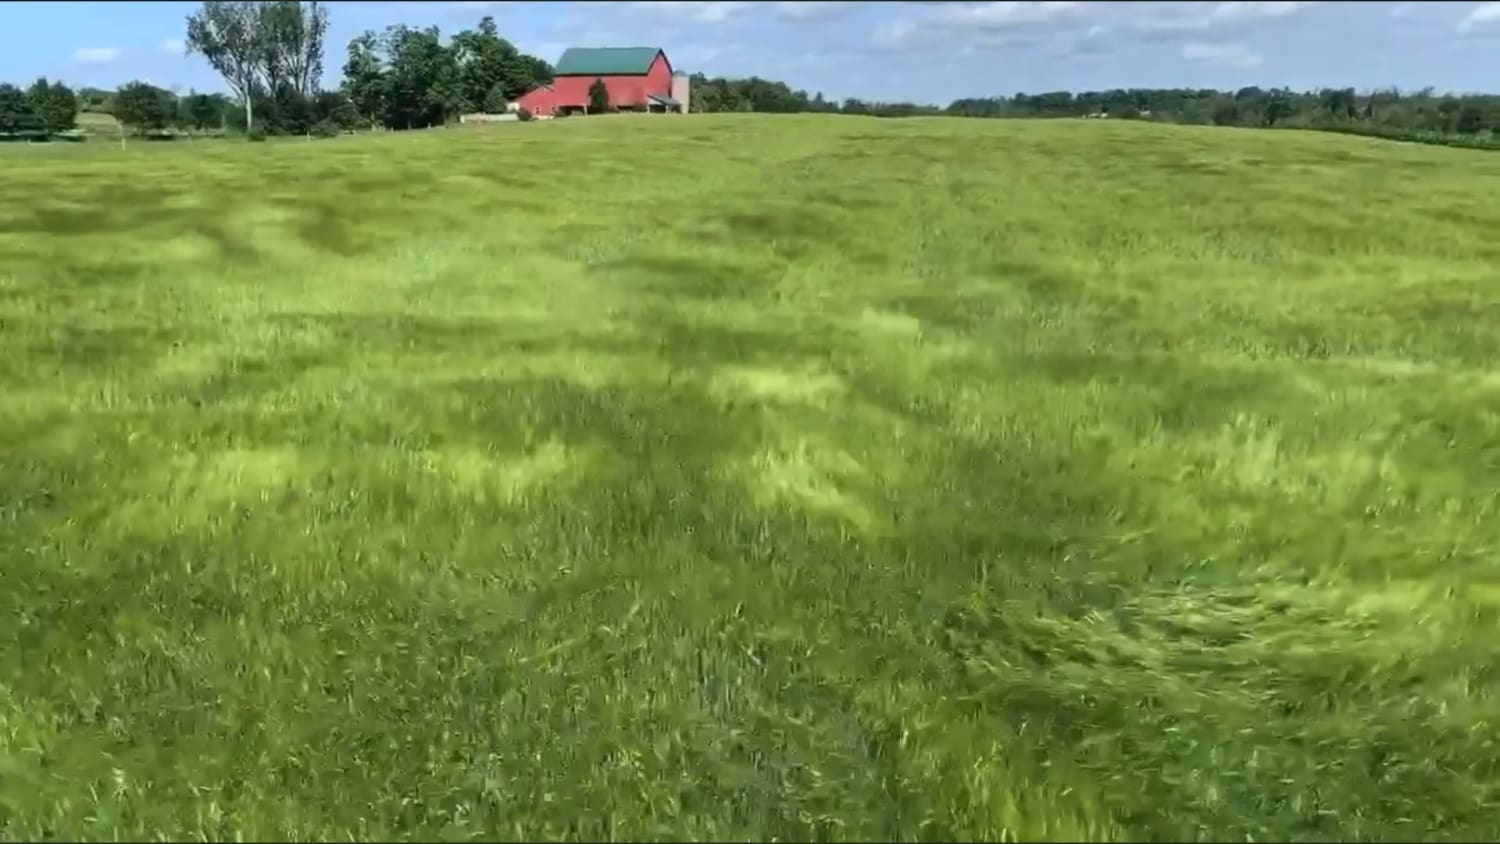 An ocean of barley in a strong breeze. (sound on) (credit: Farmer Tim)